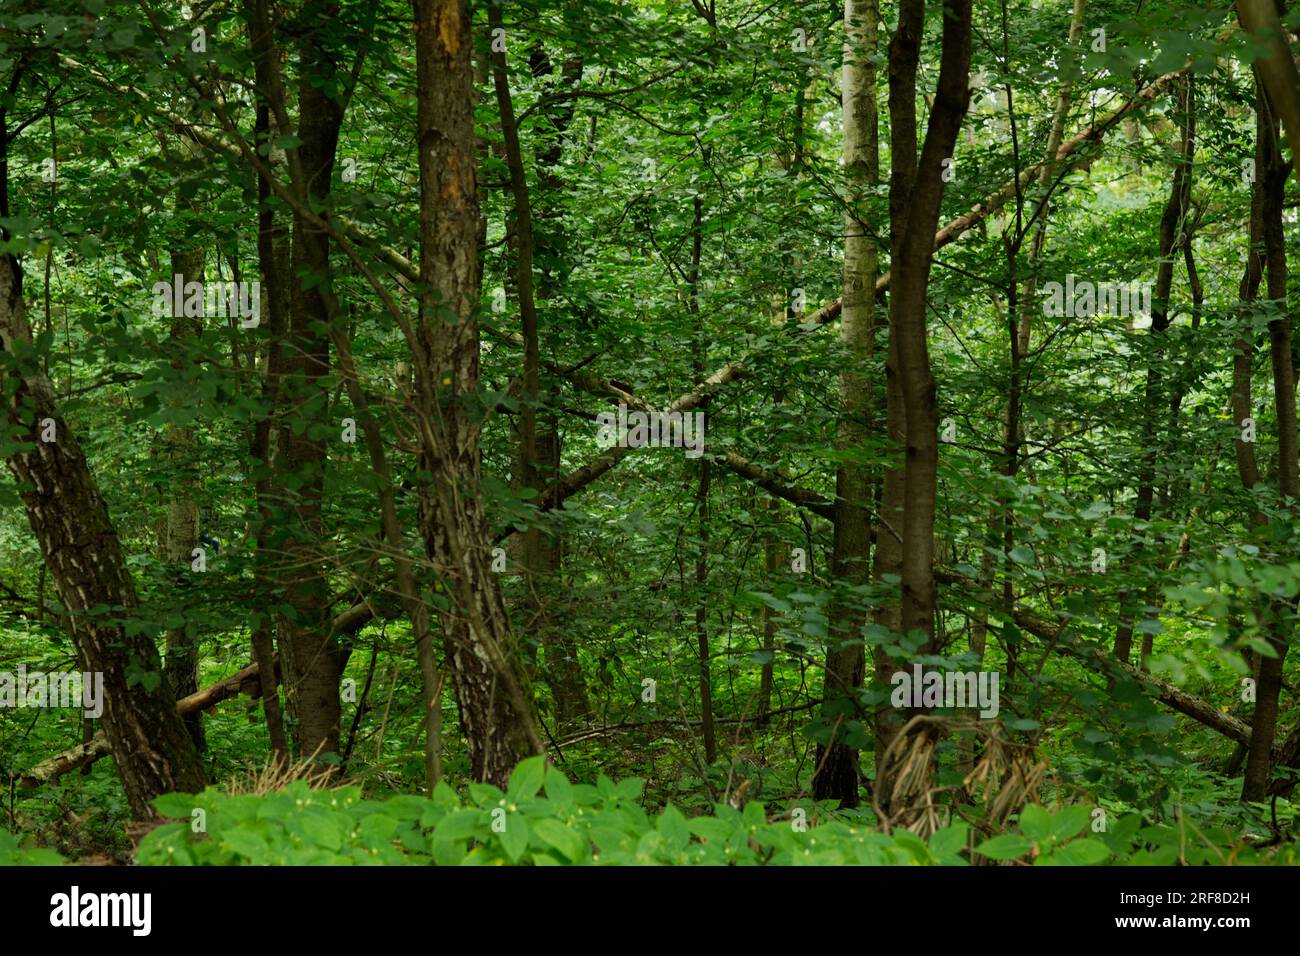 Trees form a wooden sign 'X' in the green forest Stock Photo